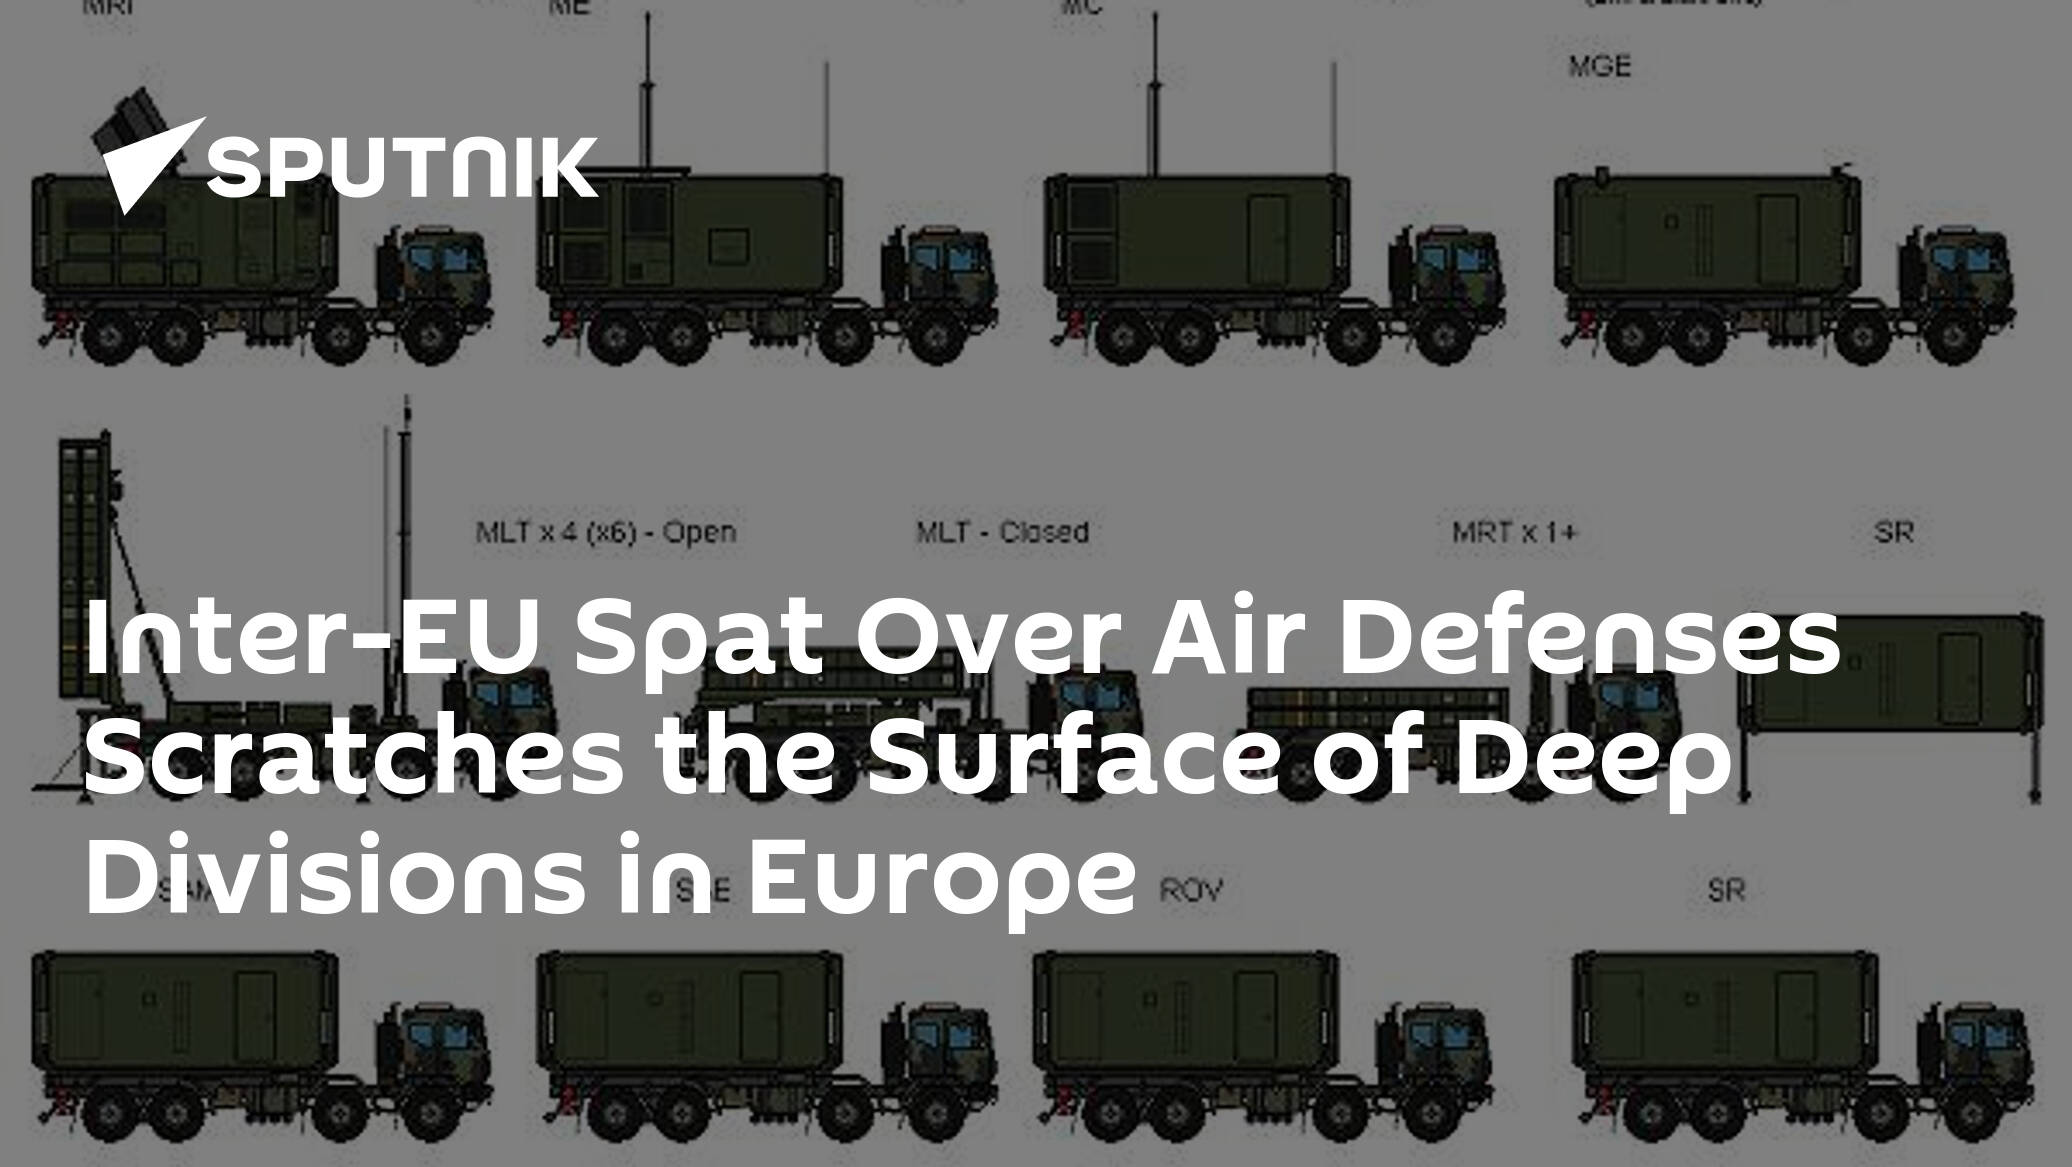 Inter-EU Spat Over Air Defenses Scratches the Surface of Deep